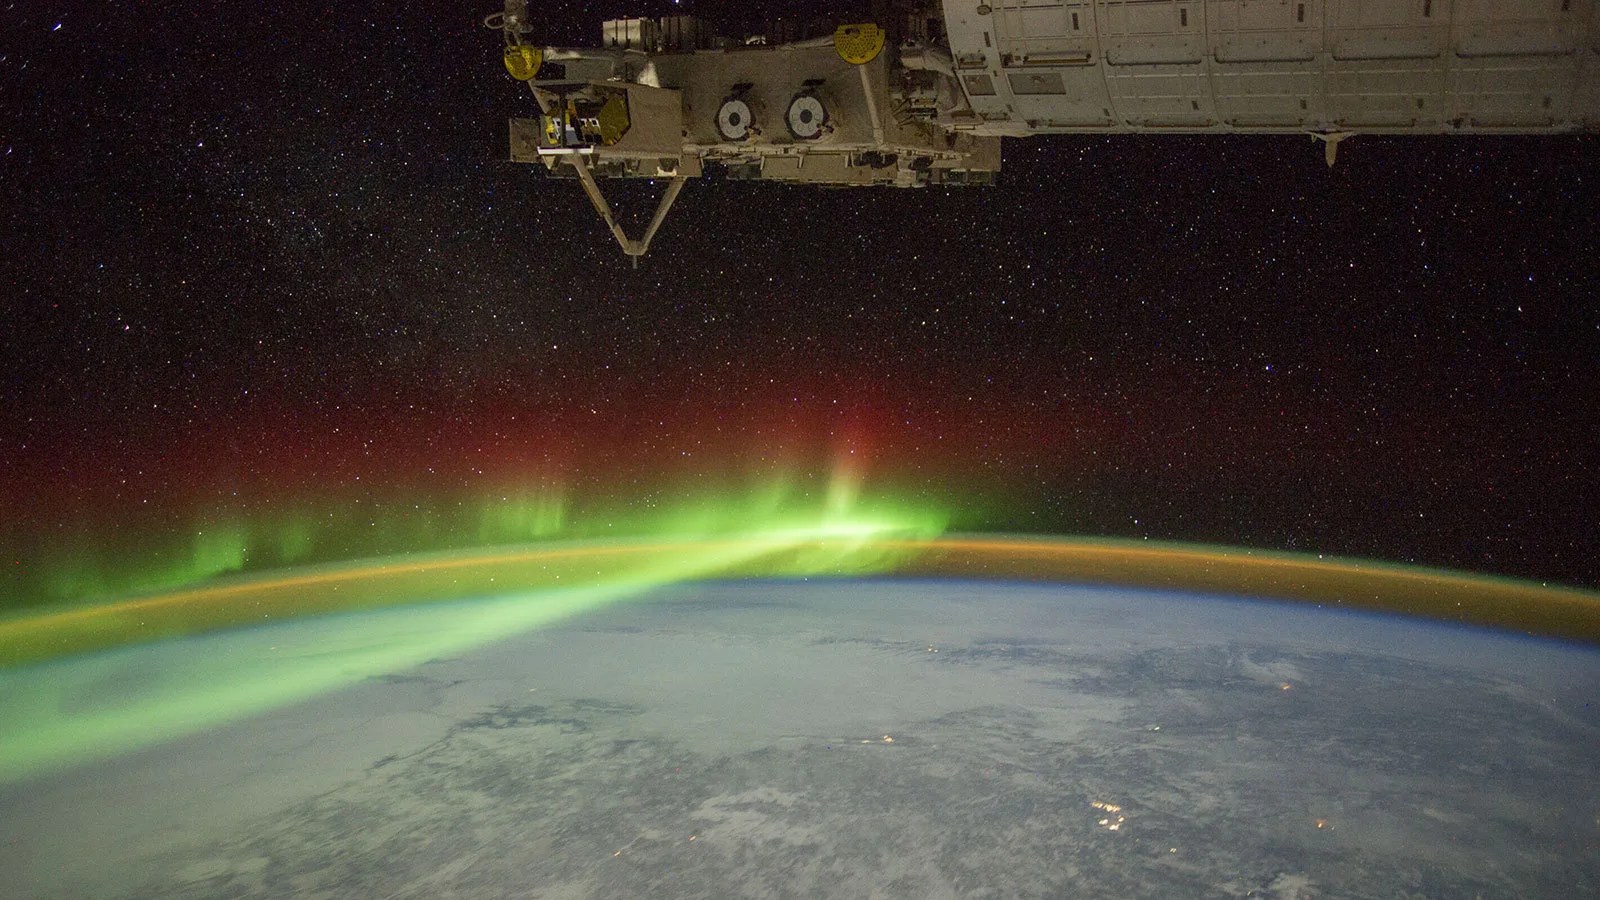 The limb of Earth with glowing auroras and a thin band of atmosphere under part of the International Space Station.